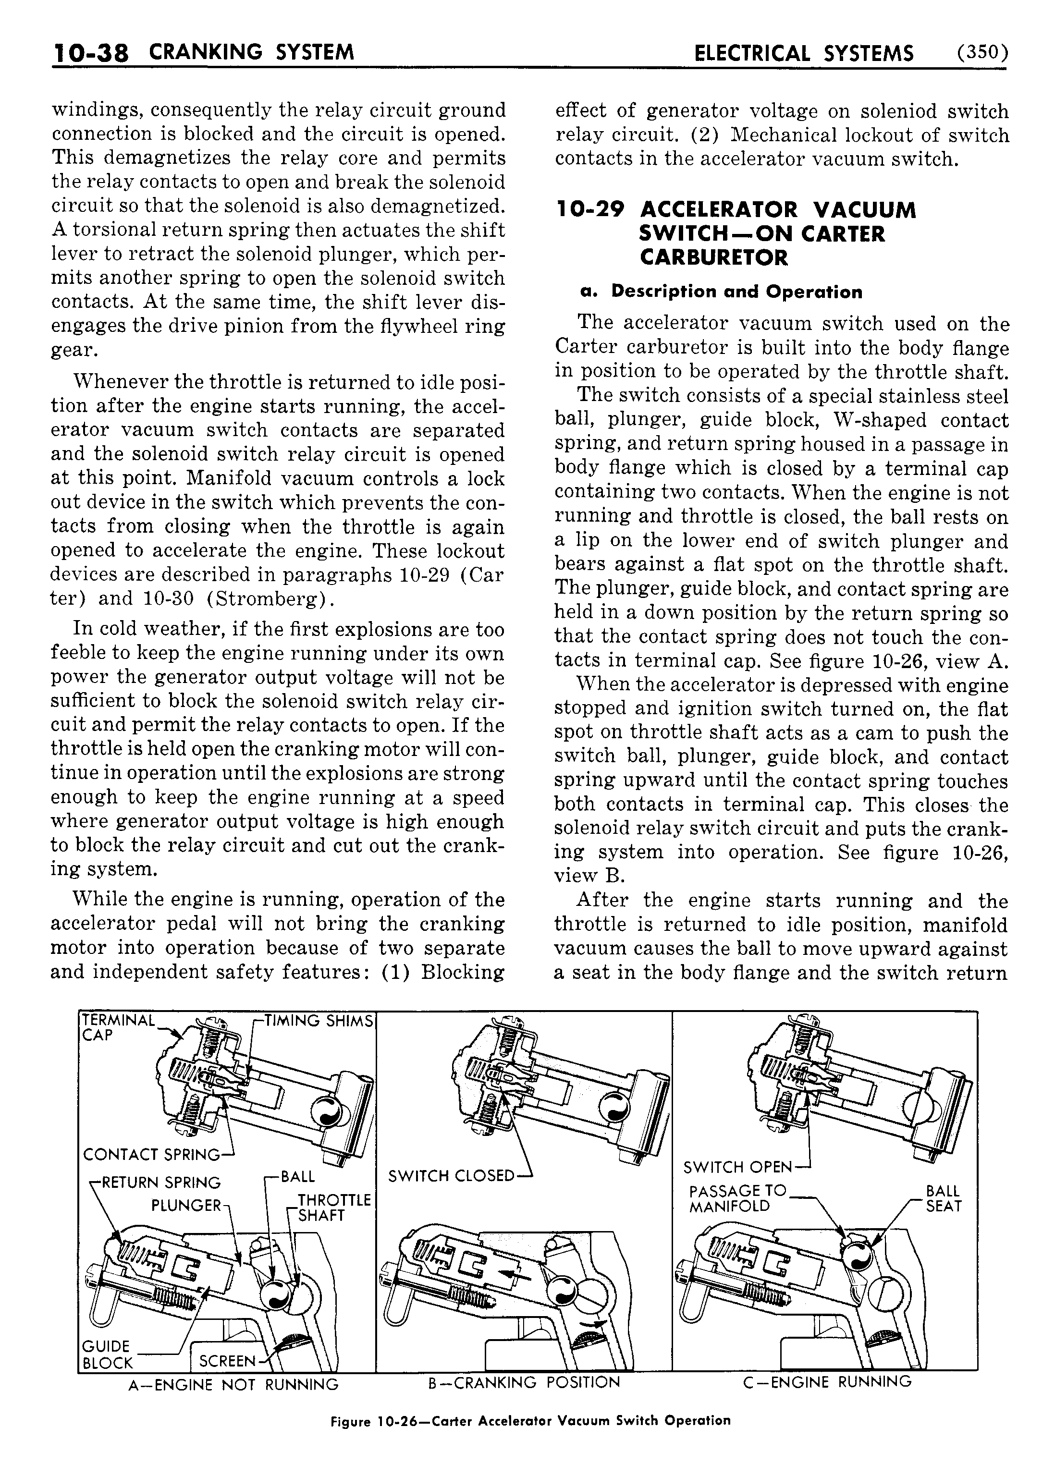 n_11 1954 Buick Shop Manual - Electrical Systems-038-038.jpg